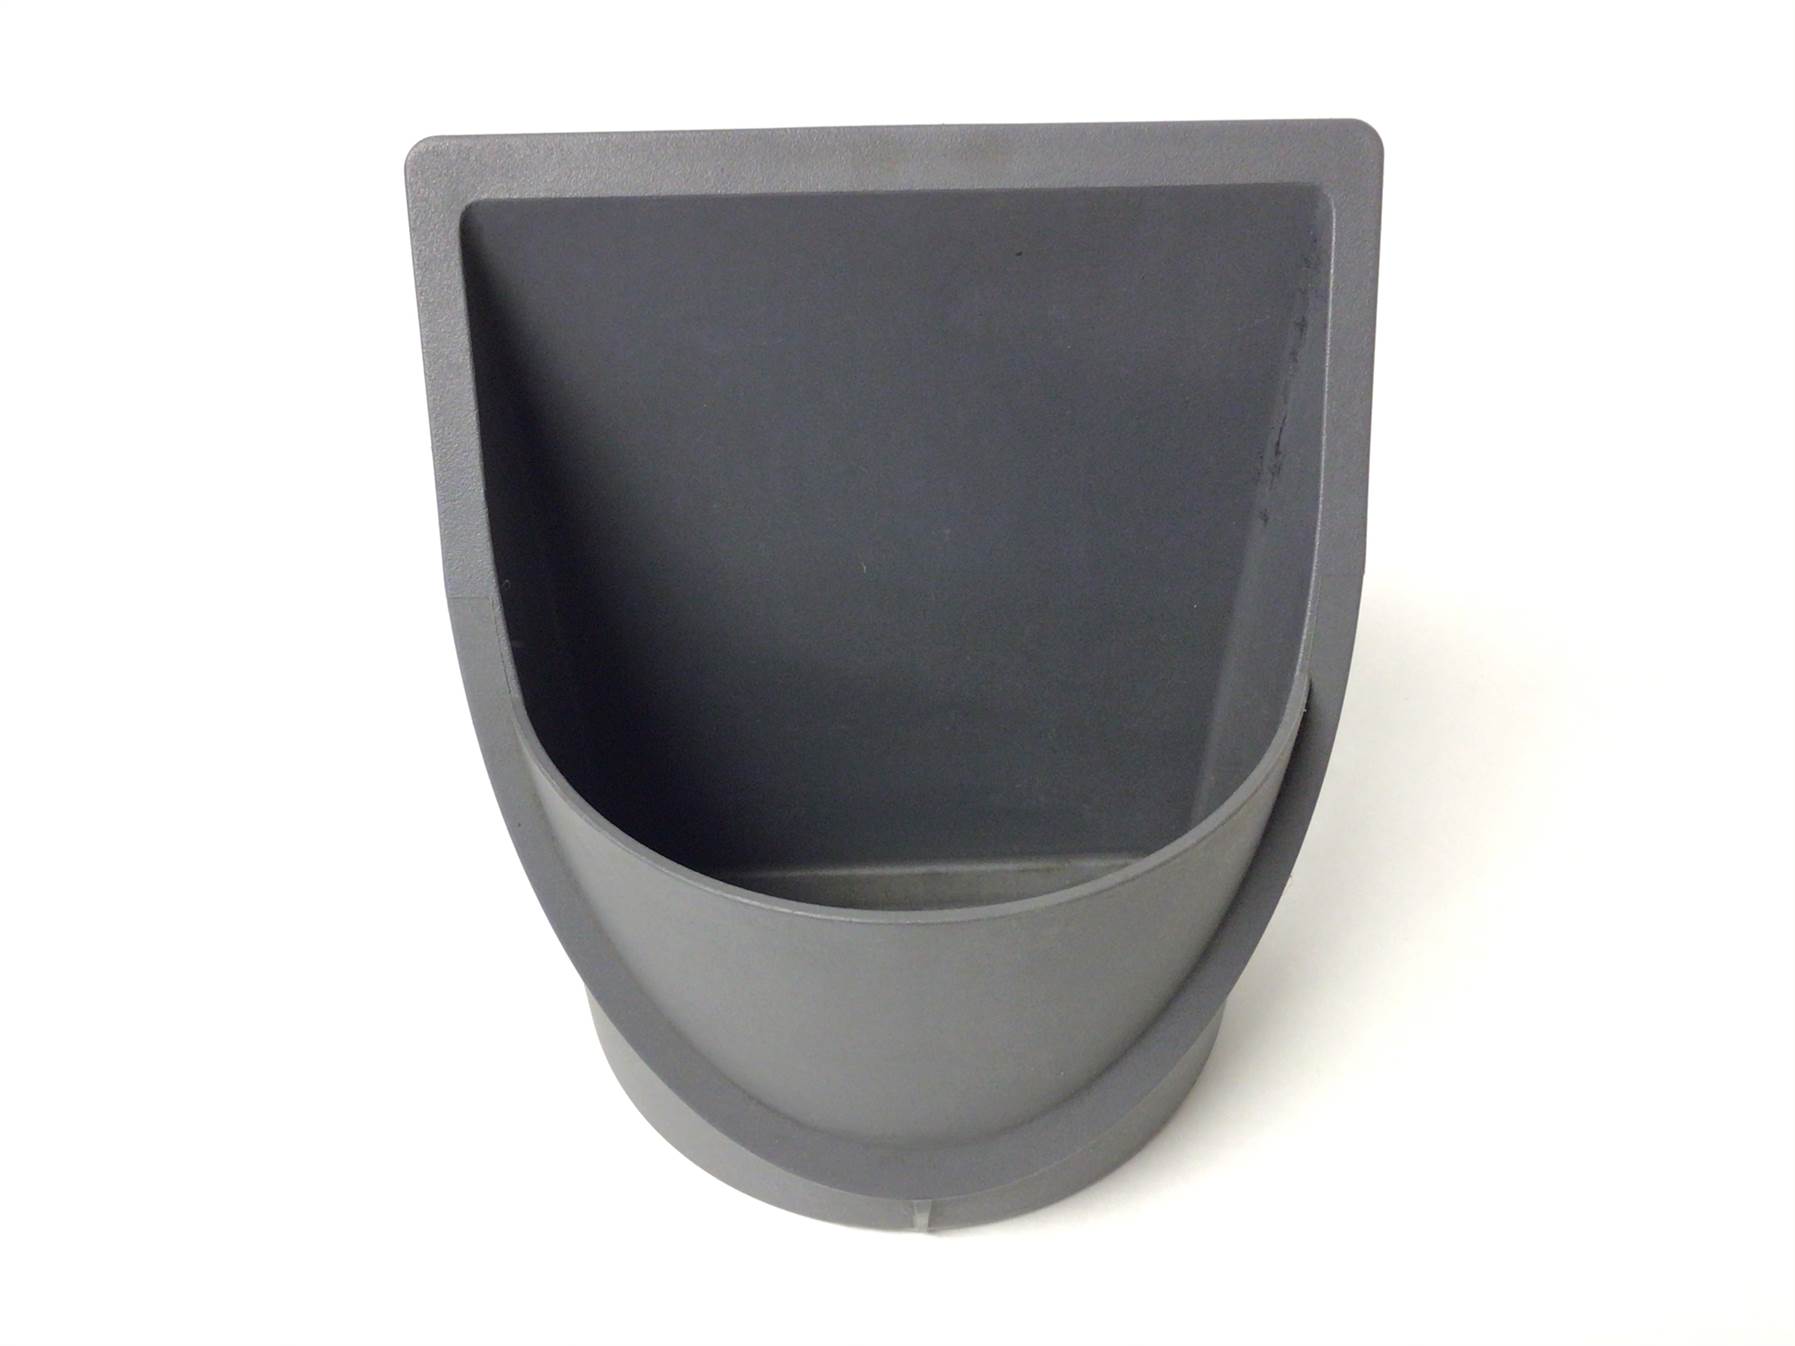 Cup holder (Used)